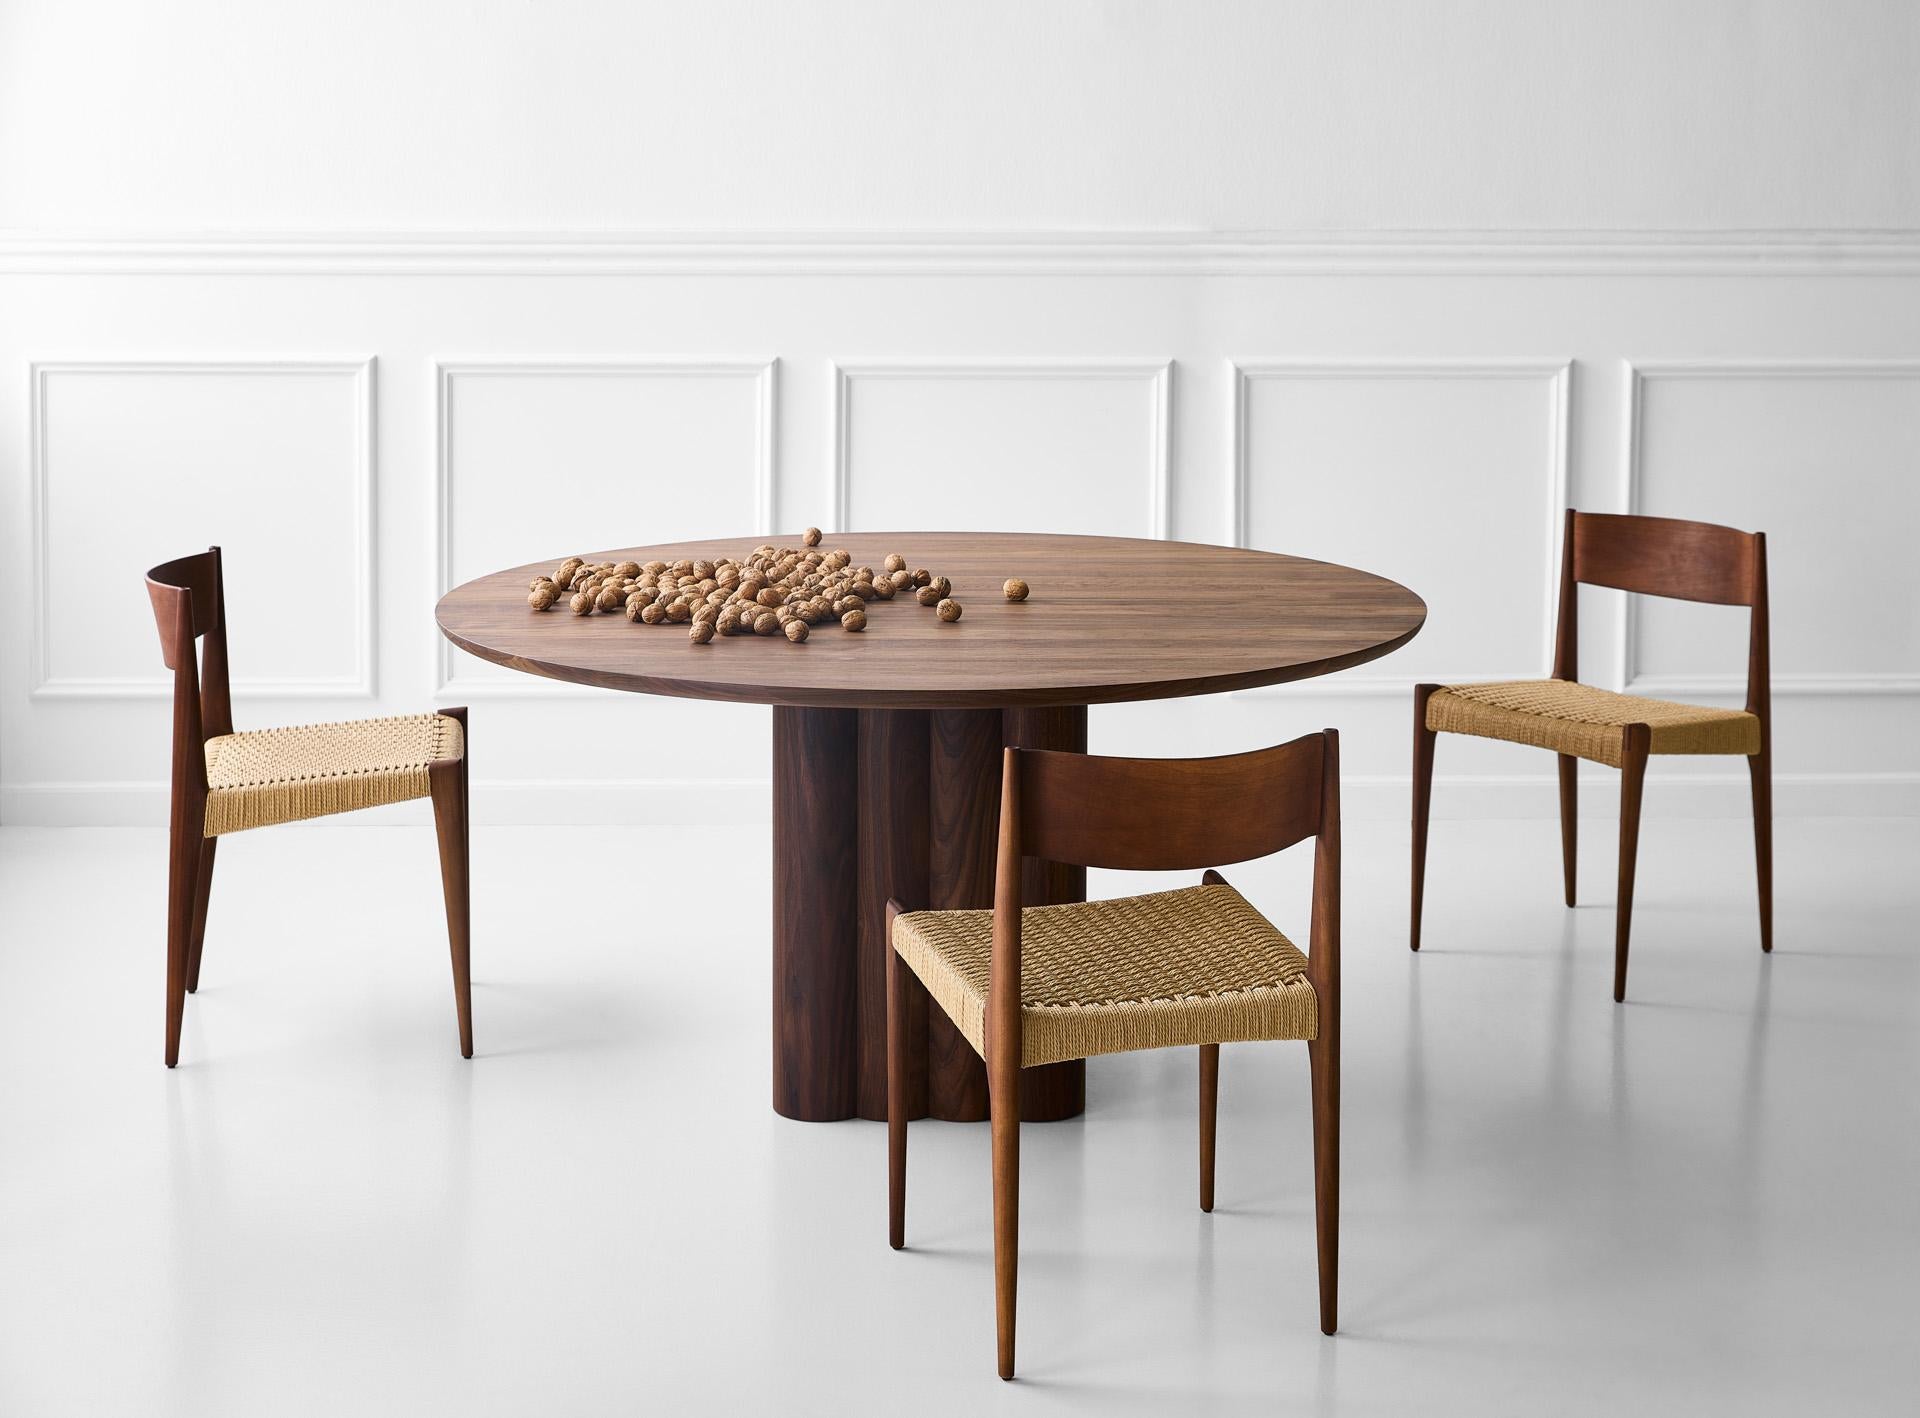 PLUSH dining table, round, 140 cm.
Solid wood table top and legs. Handmade in Denmark. 
Signed by Jacob Plejdrup for DK3

Table's height: 72 or 74 cm

Sold model: 
Smoked Oak
Cube base: 46x46 cm
Table top Thickness: 30 mm
(Extraction for max. 2